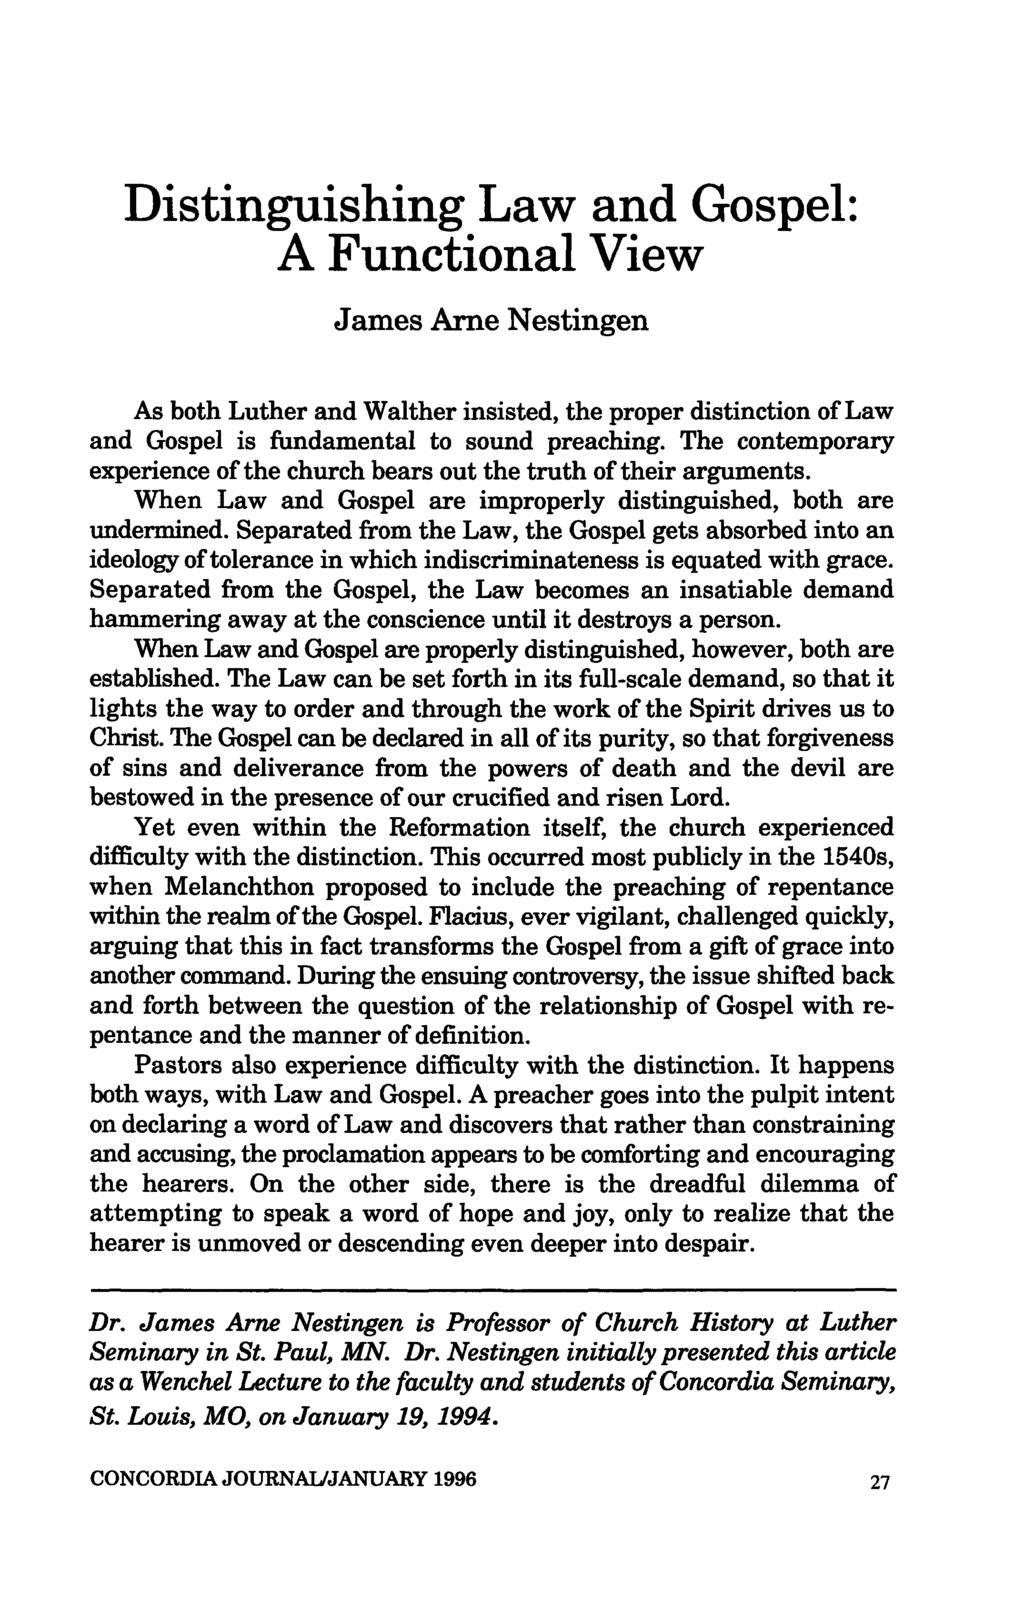 Distinguishing Law and Gospel: A Functional View James Arne Nestingen As both Luther and Walther insisted, the proper distinction of Law and Gospel is fundamental to sound preaching.